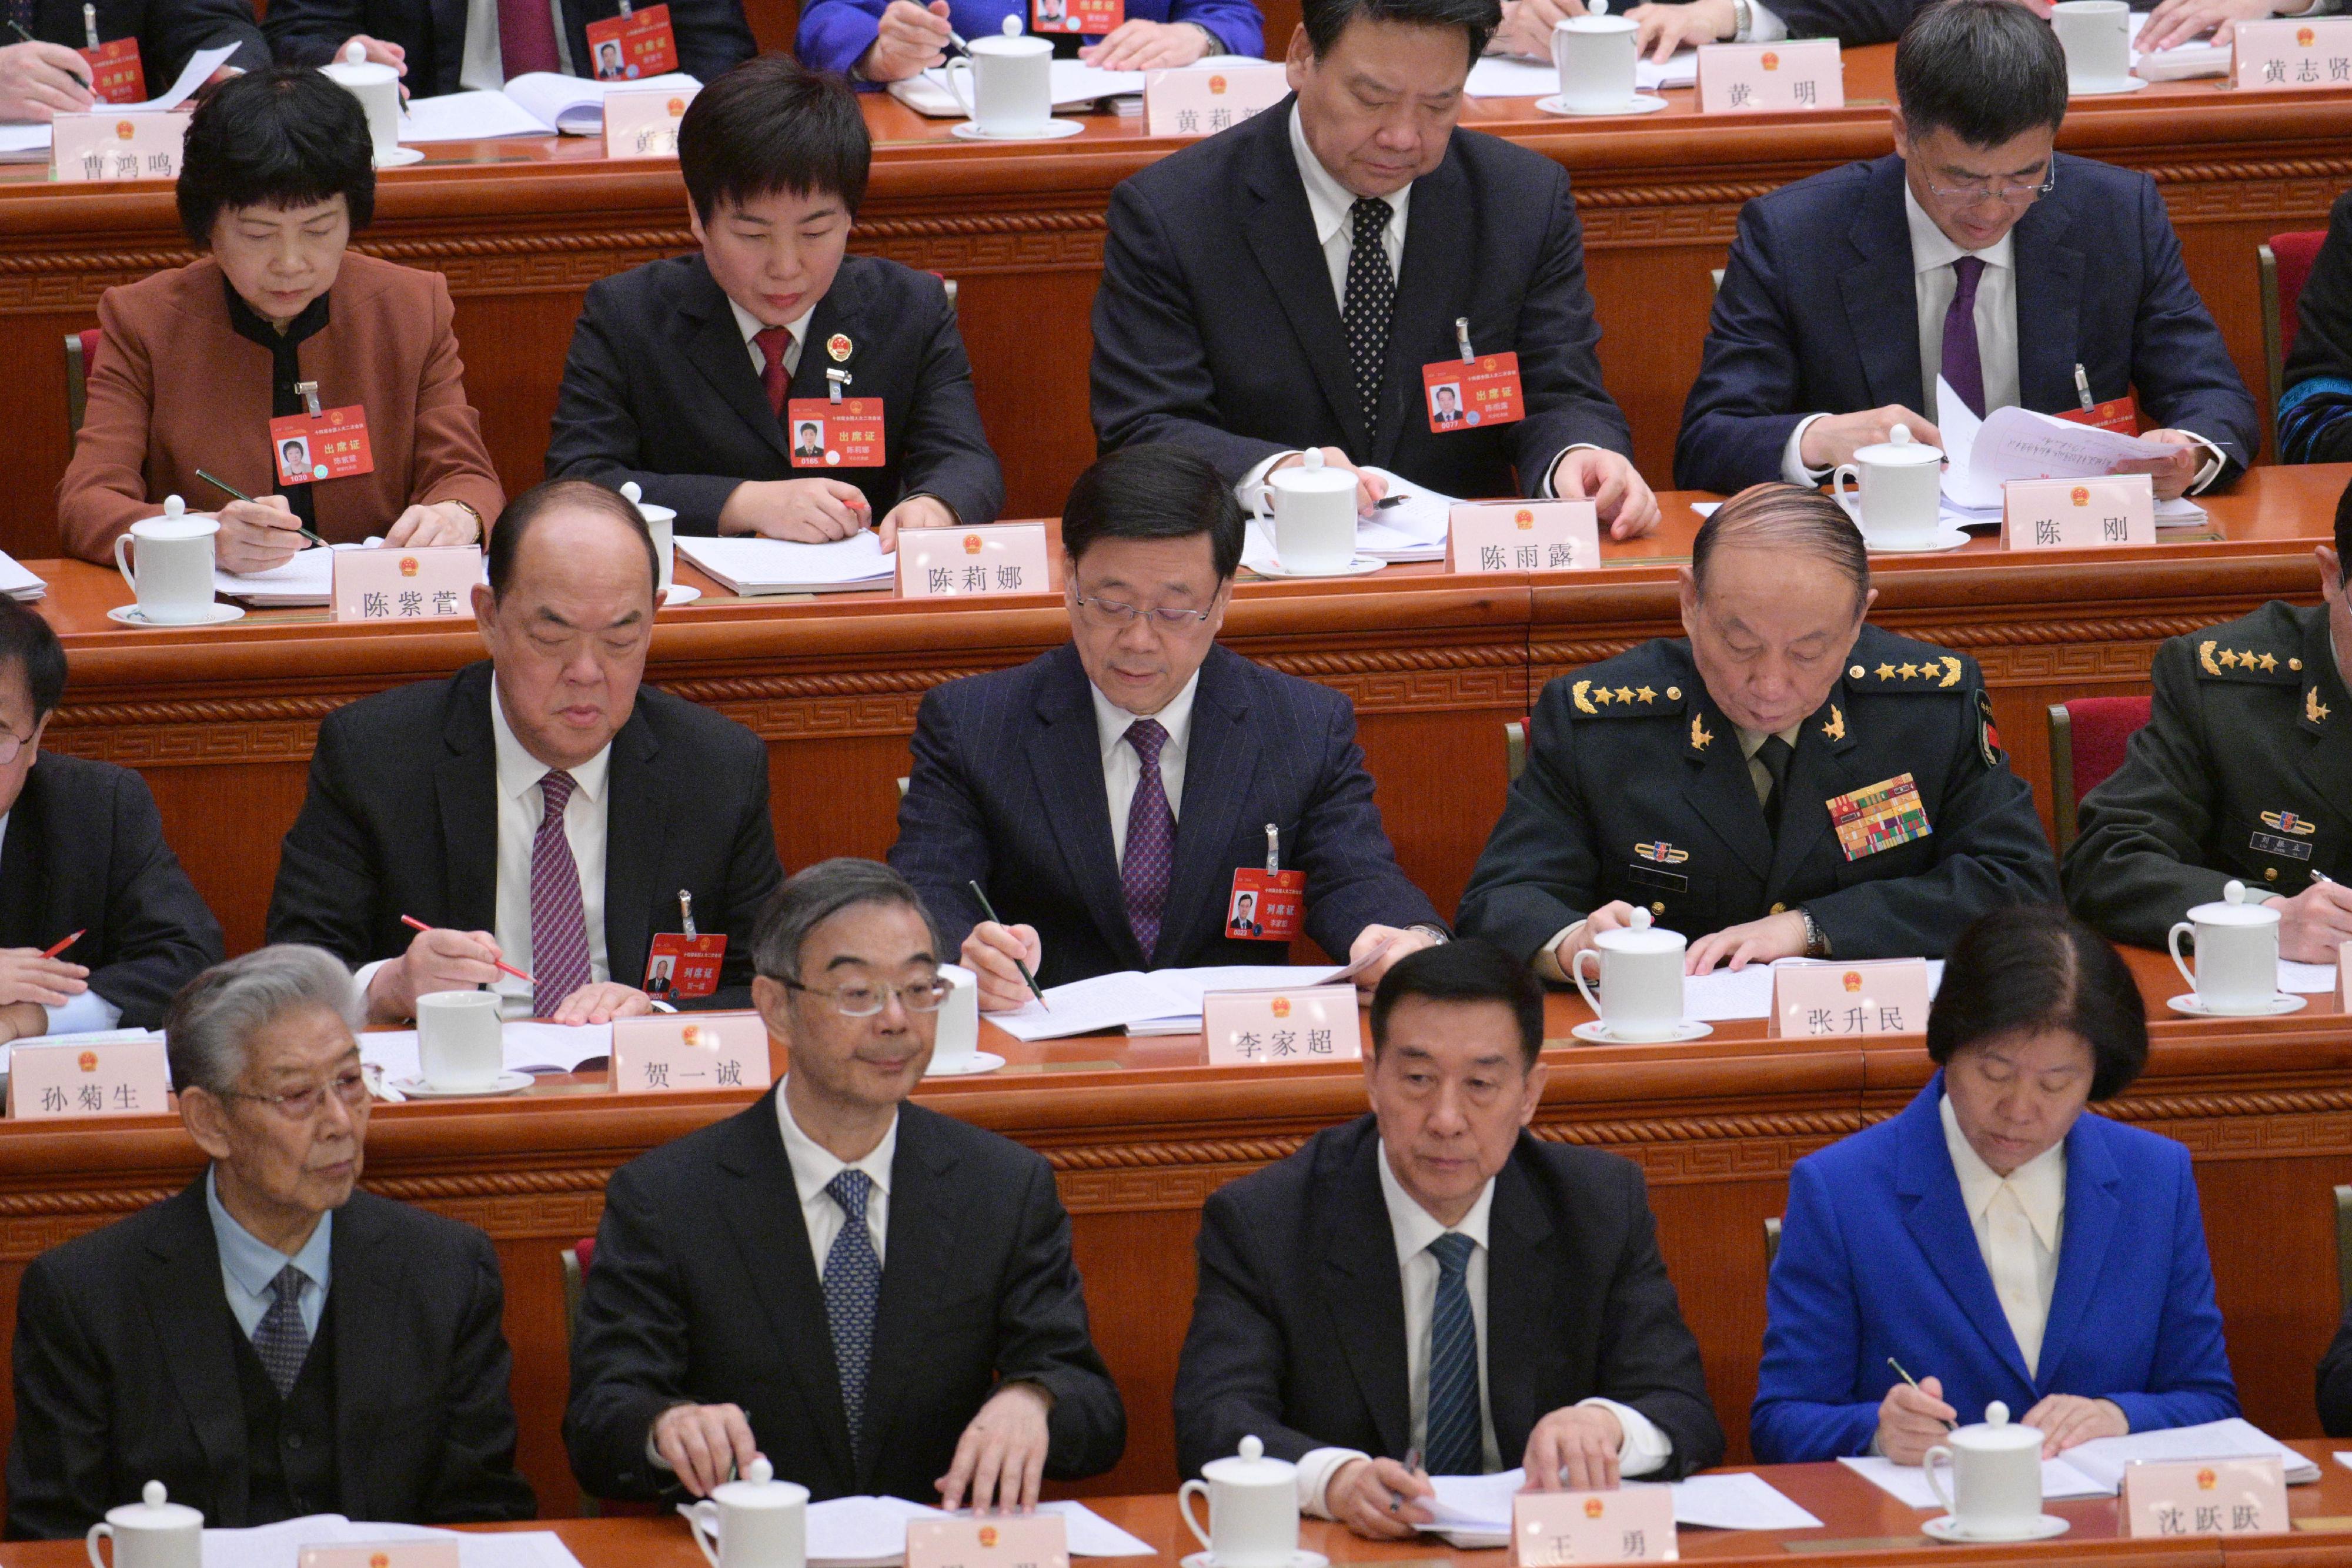 The Chief Executive, Mr John Lee (second row, centre), attends the opening meeting of the second annual session of the 14th National People's Congress in Beijing this morning (March 5).